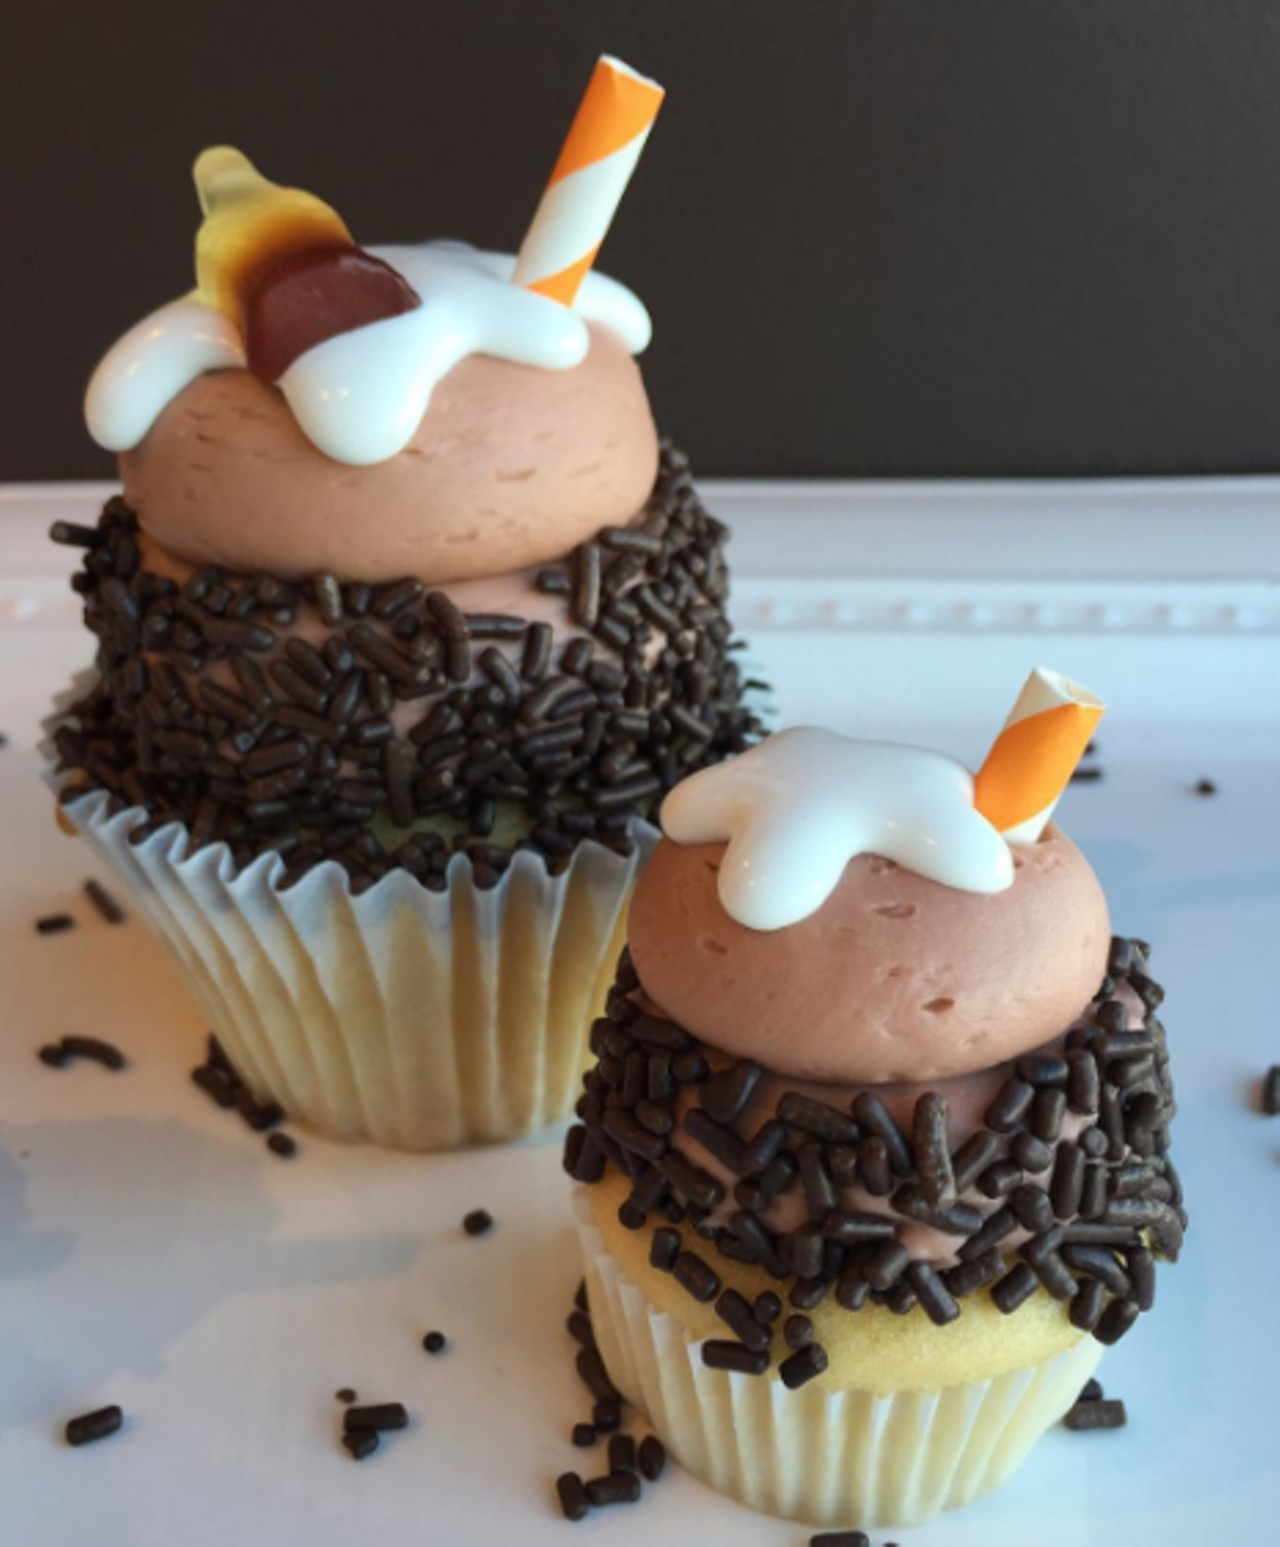 Gigi&#146;s Cupcakes
2562 E. Colonial Drive, 407-893-9846
Cupcakes are an obvious choice at Gigi&#146;s. Try the root beer float cupcake, topped with root beer buttercream frosting, marshmallow cream and chocolate sprinkles with a candy soda bottle.
Photo via gigiscupcakesfargo/Instagram